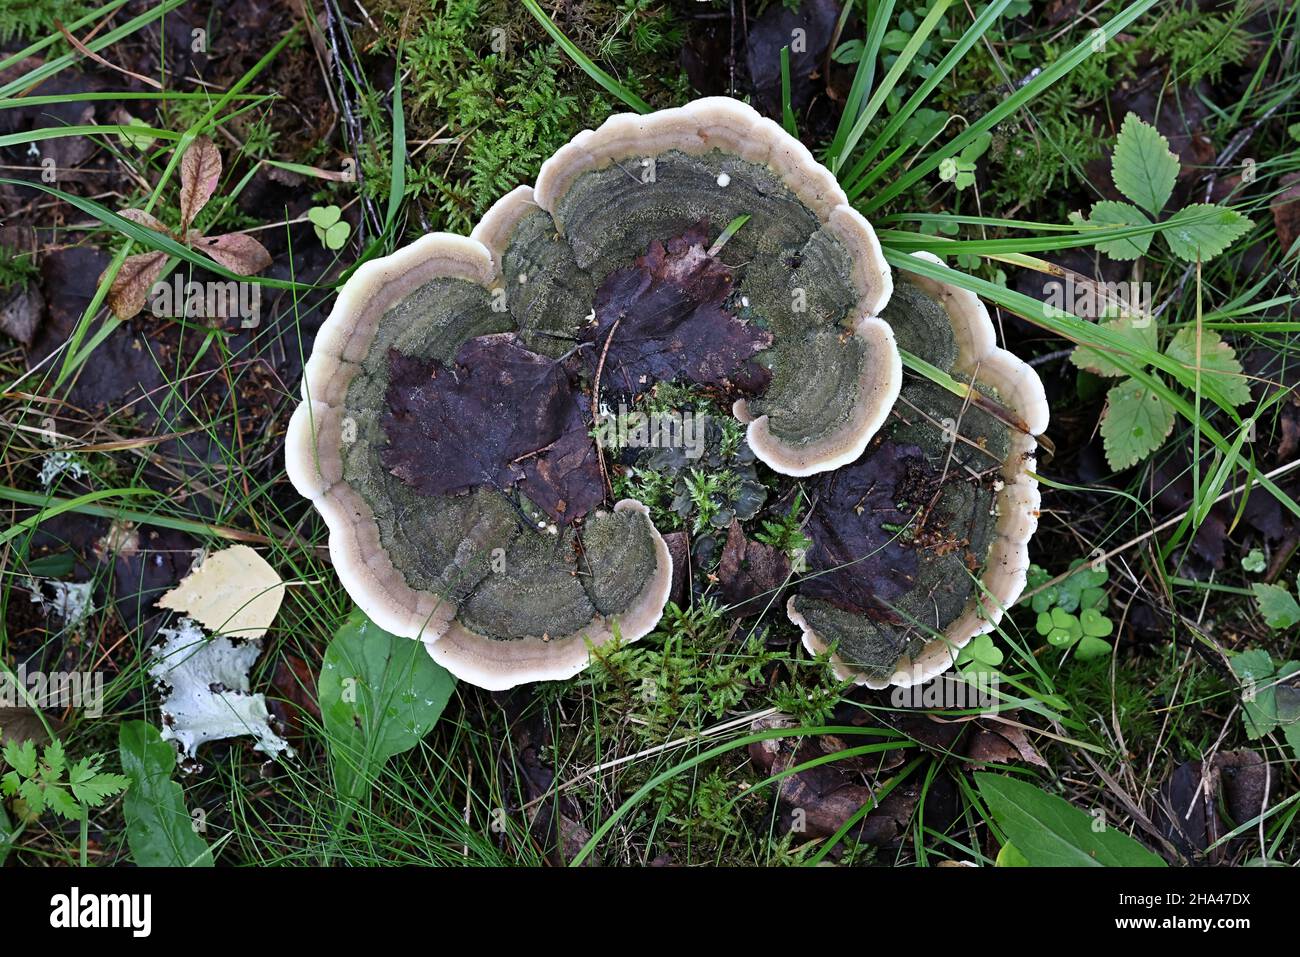 Cerrena unicolor, known as mossy maze polypore, wild fungus from Finland Stock Photo